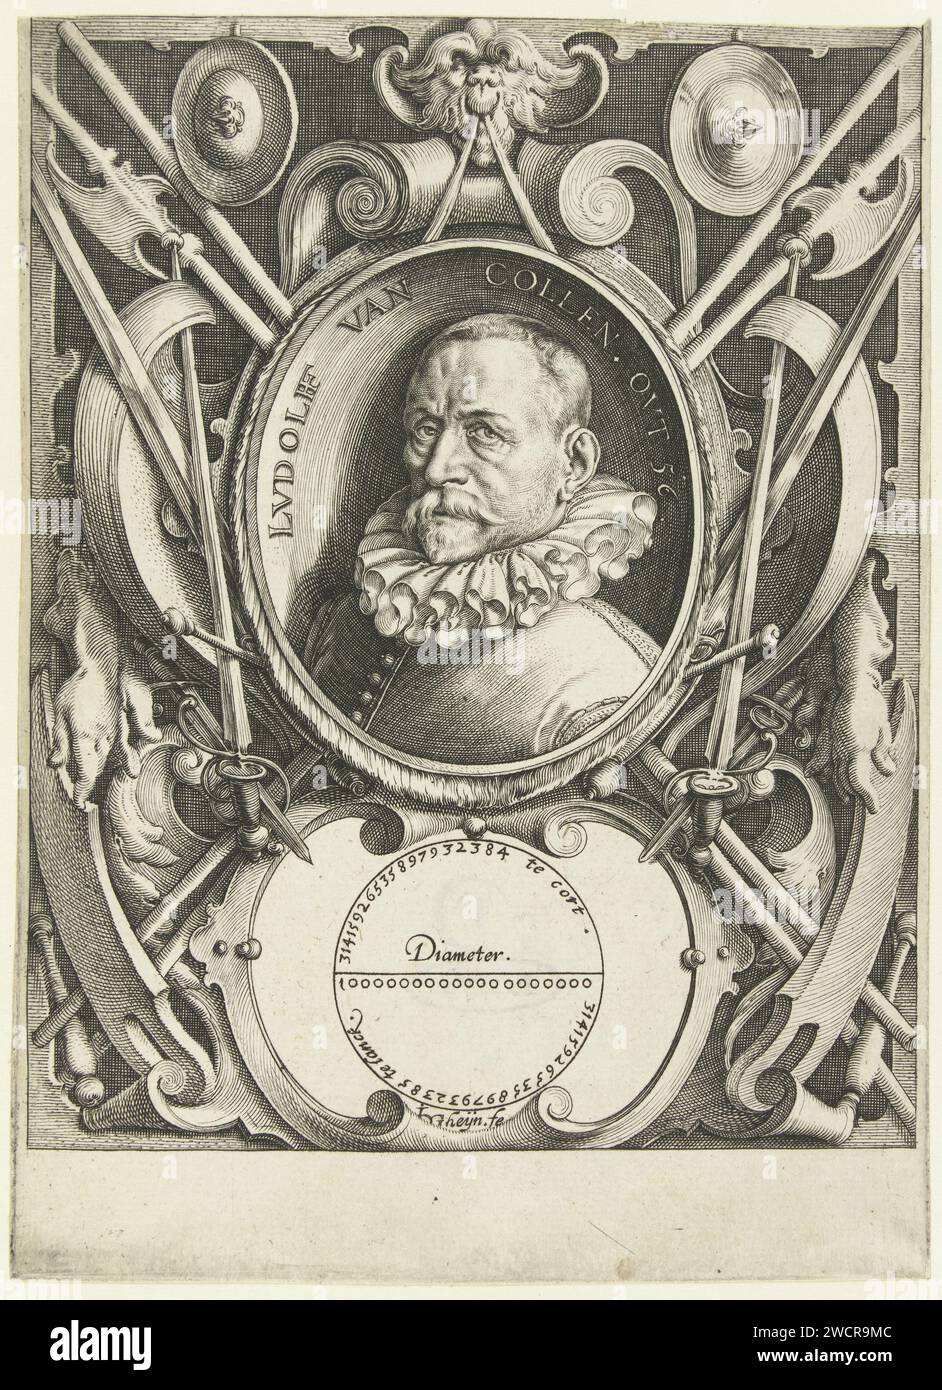 Portrait of Ludolf van Ceulen at the age of 56, Jacques de Gheyn (II), 1596 print Buste van Ludolf van Ceulen (Hildesheim, January 28, 1540 - Leiden, 31 December 1610) at the age of 56, with loose -pleated collar, in oval with edge, contained in ornament list with rolling and weapons. Under the portrait an image of a circle with a description of the number pi. Under the performance, space has been left empty for a caption. Van Ceulen was Schermer and Mathematicus. He became (according to Meursius in 1599, according to the resolutions of curators on January 10, 1600) on the recommendation of Pr Stock Photo